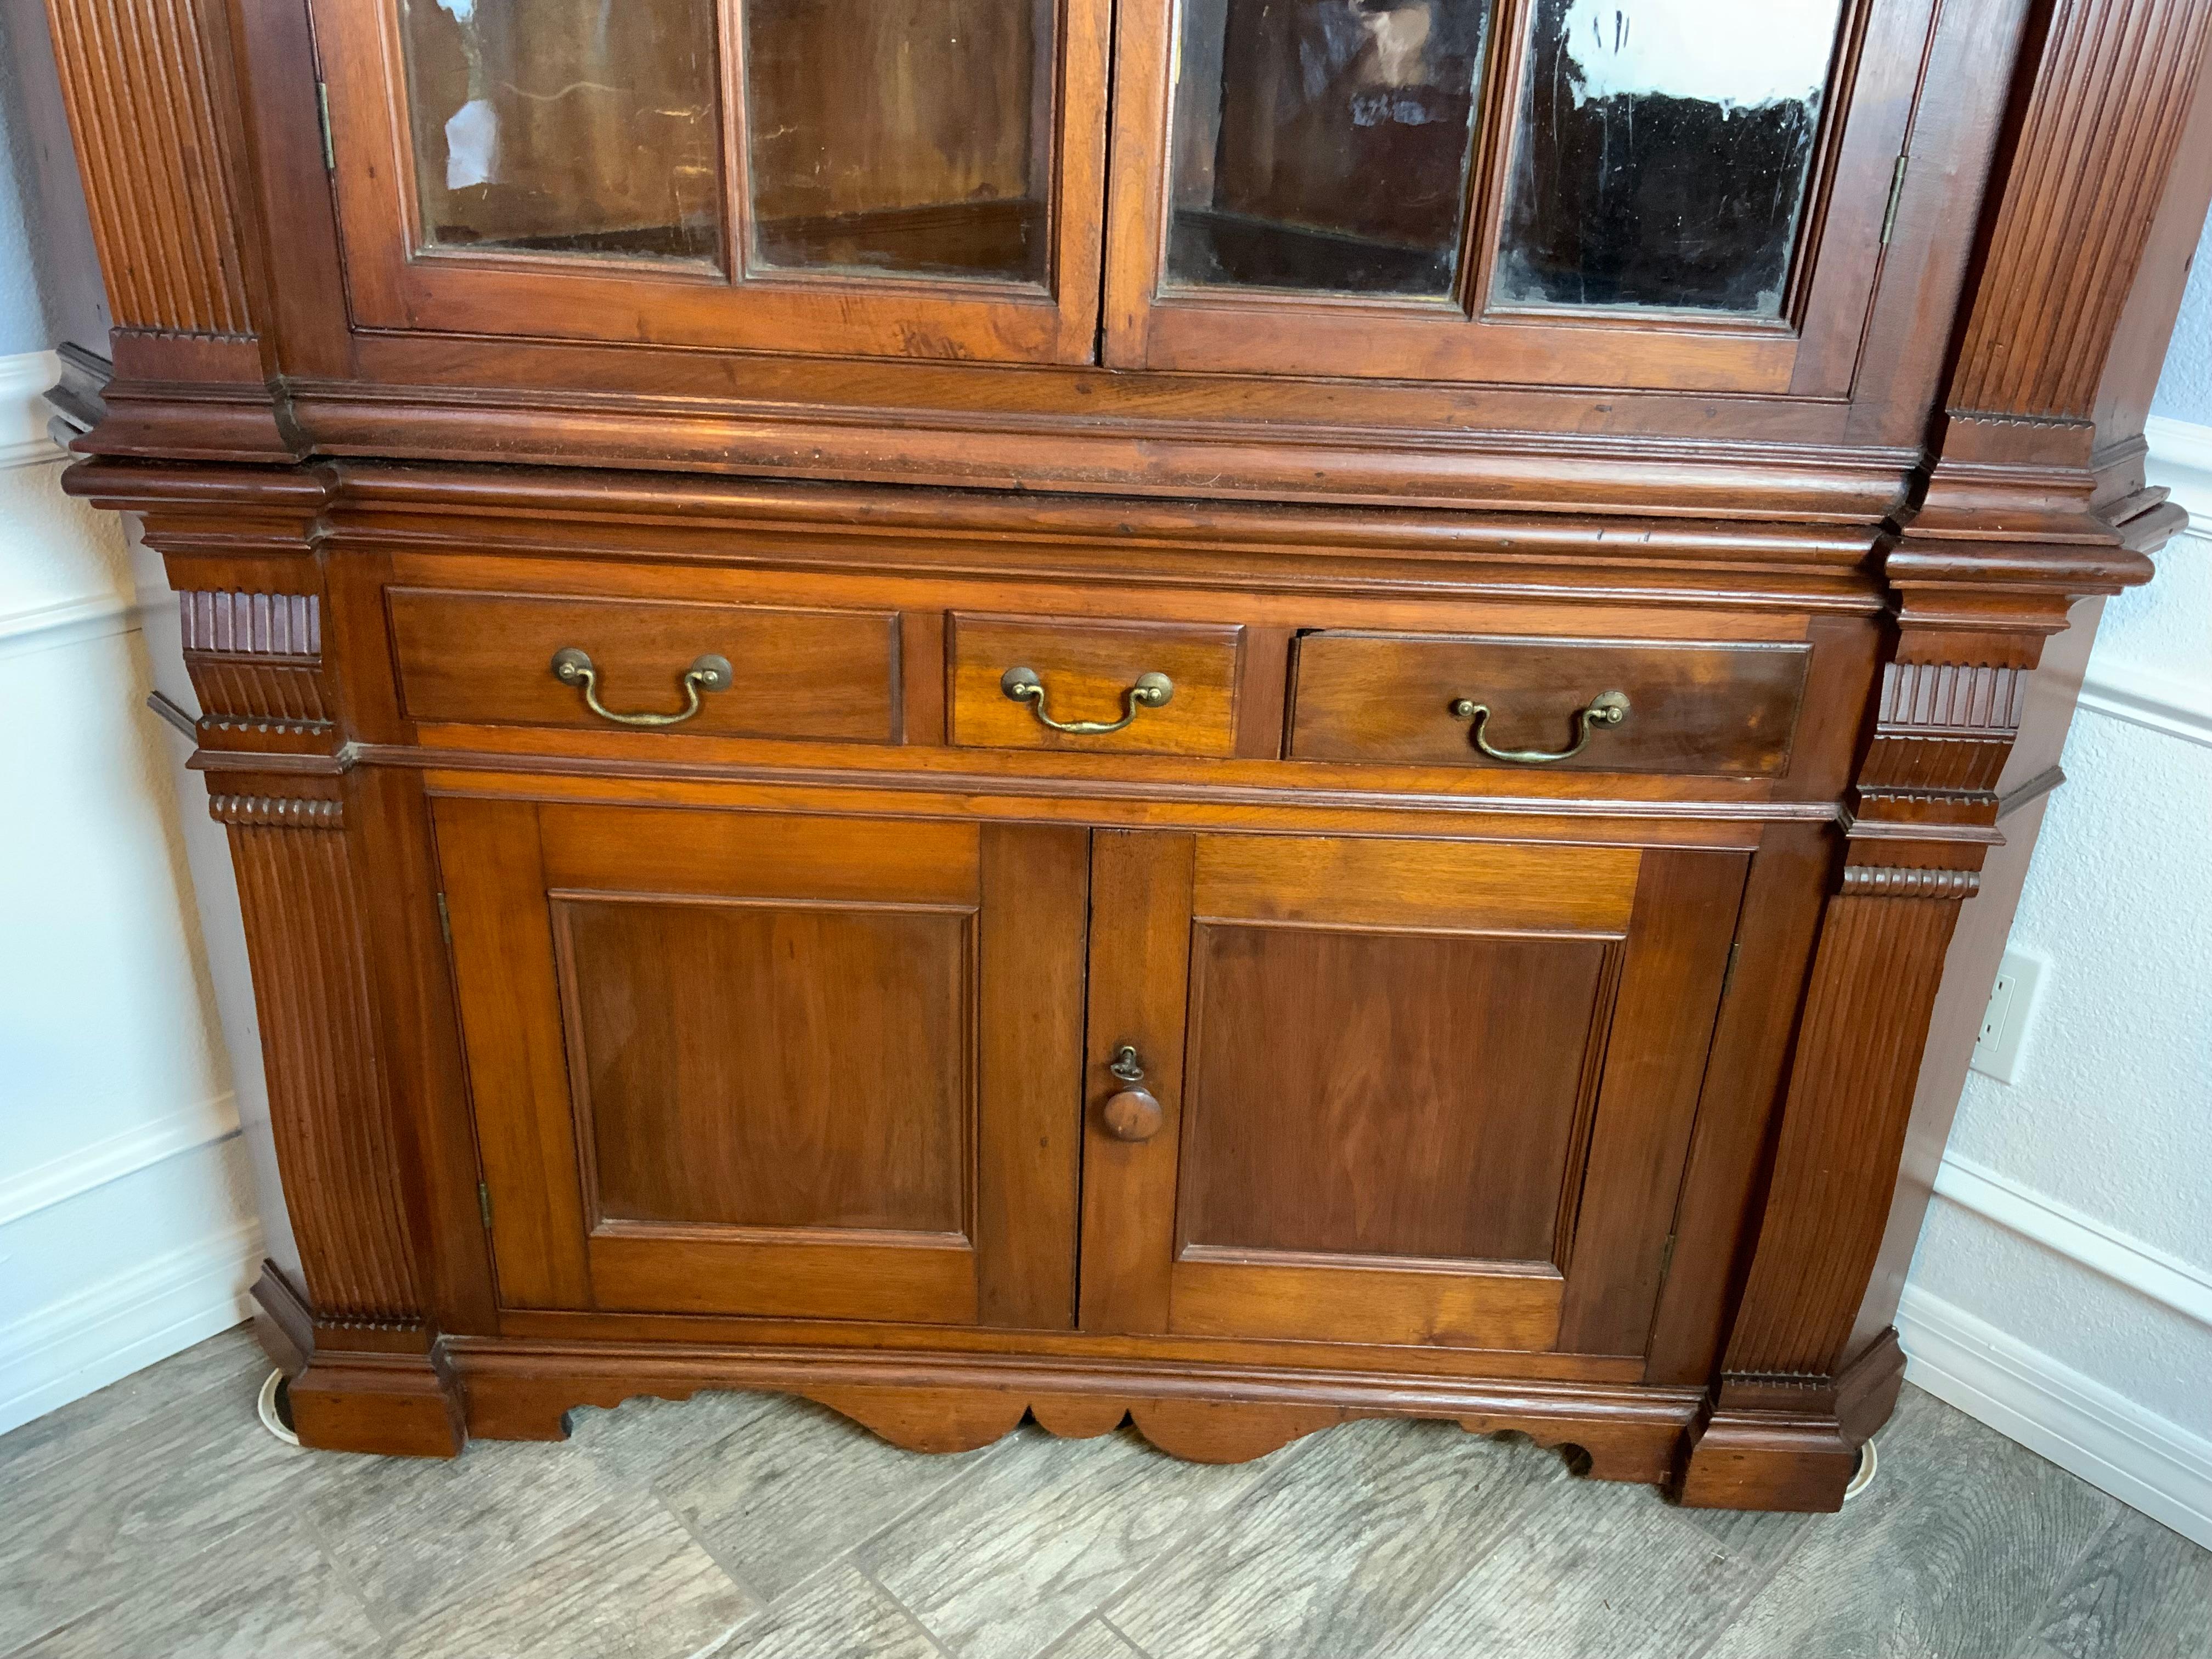 An exceptionally fine large two piece Federal Walnut architectural corner cupboard 1780-1800 attributed to the Frederick County area of Maryland sometime in the third quarter 18th century.  Fluted pilasters, compass-head door aperture with keystone,